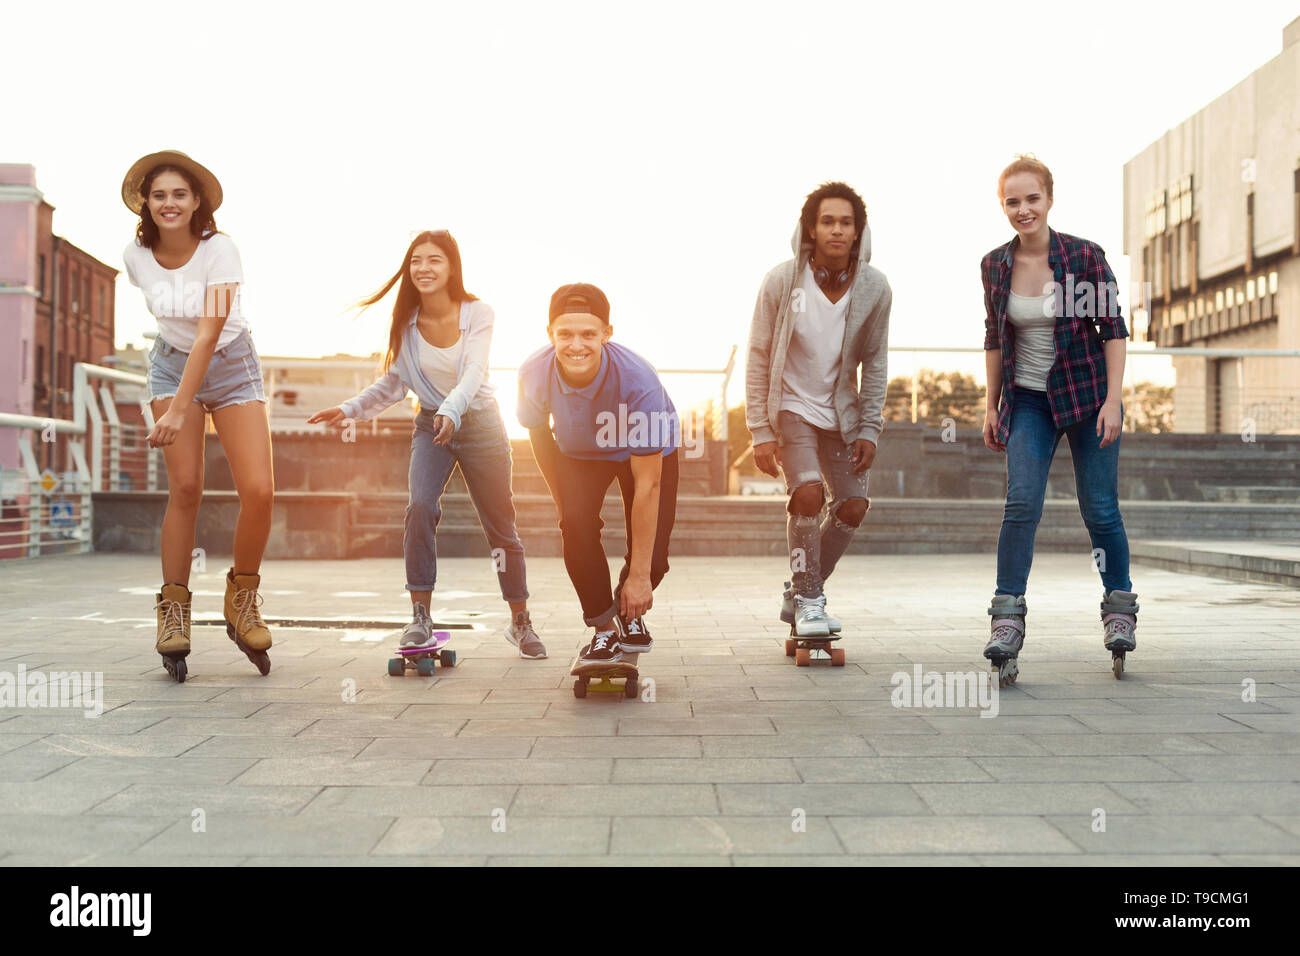 Happy teenagers having fun, riding on skateboards and rollers Stock Photo